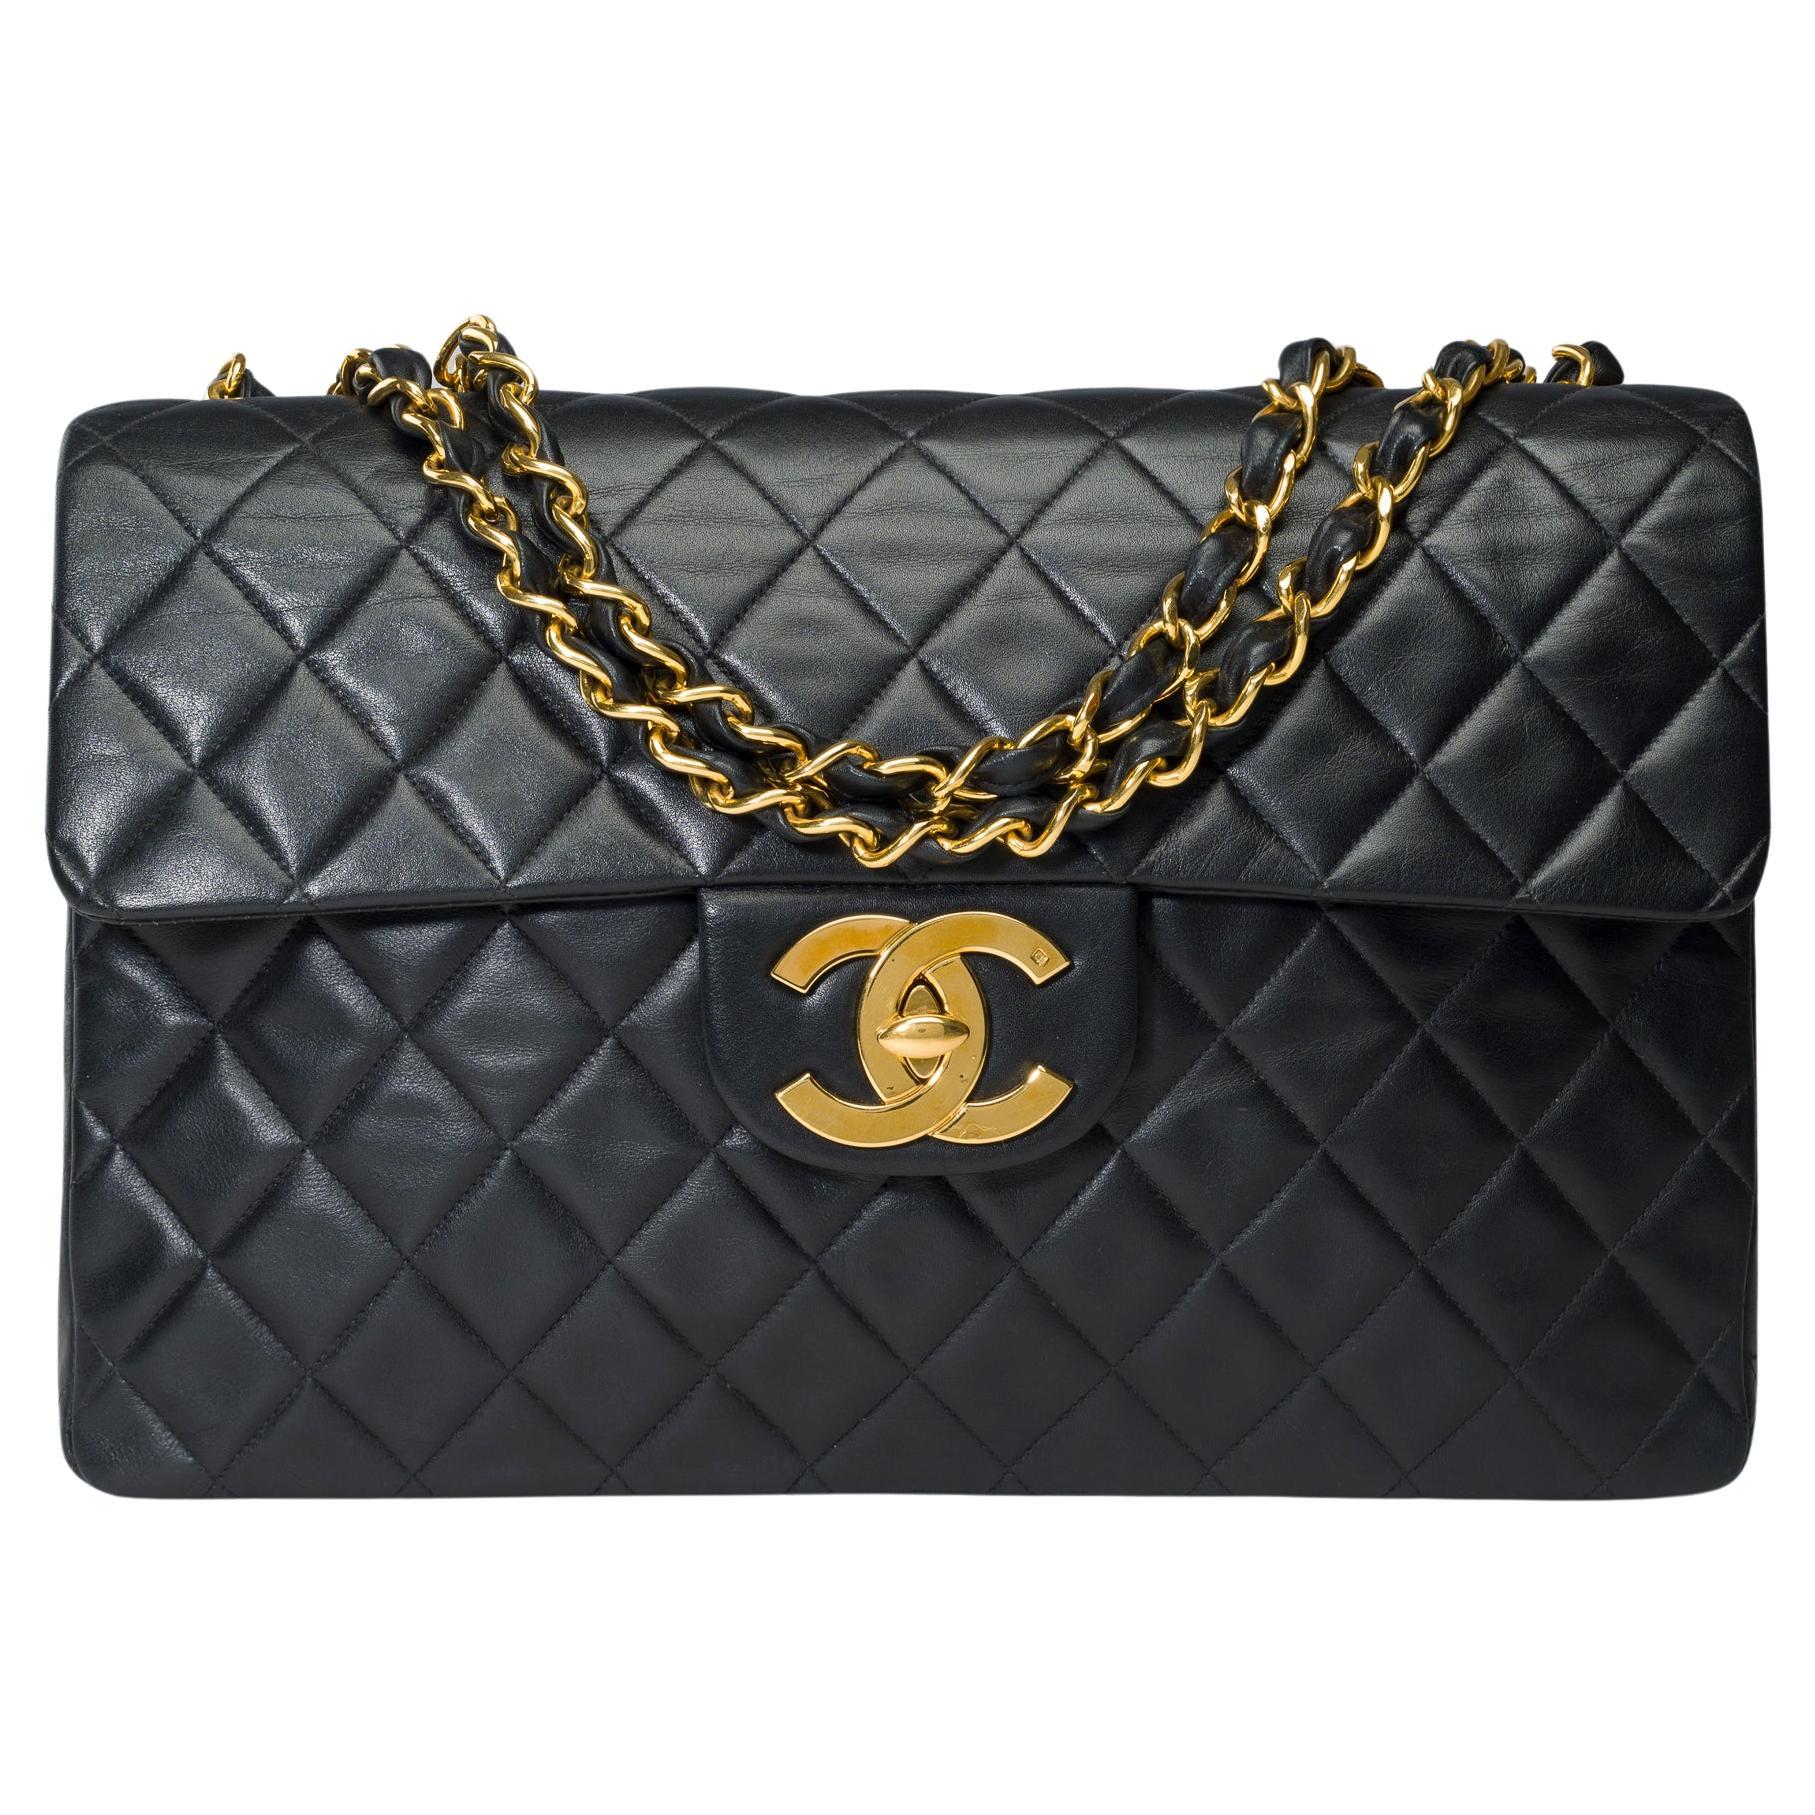 Chanel Timeless Maxi Jumbo flap shoulder bag in black quilted lambskin, GHW For Sale